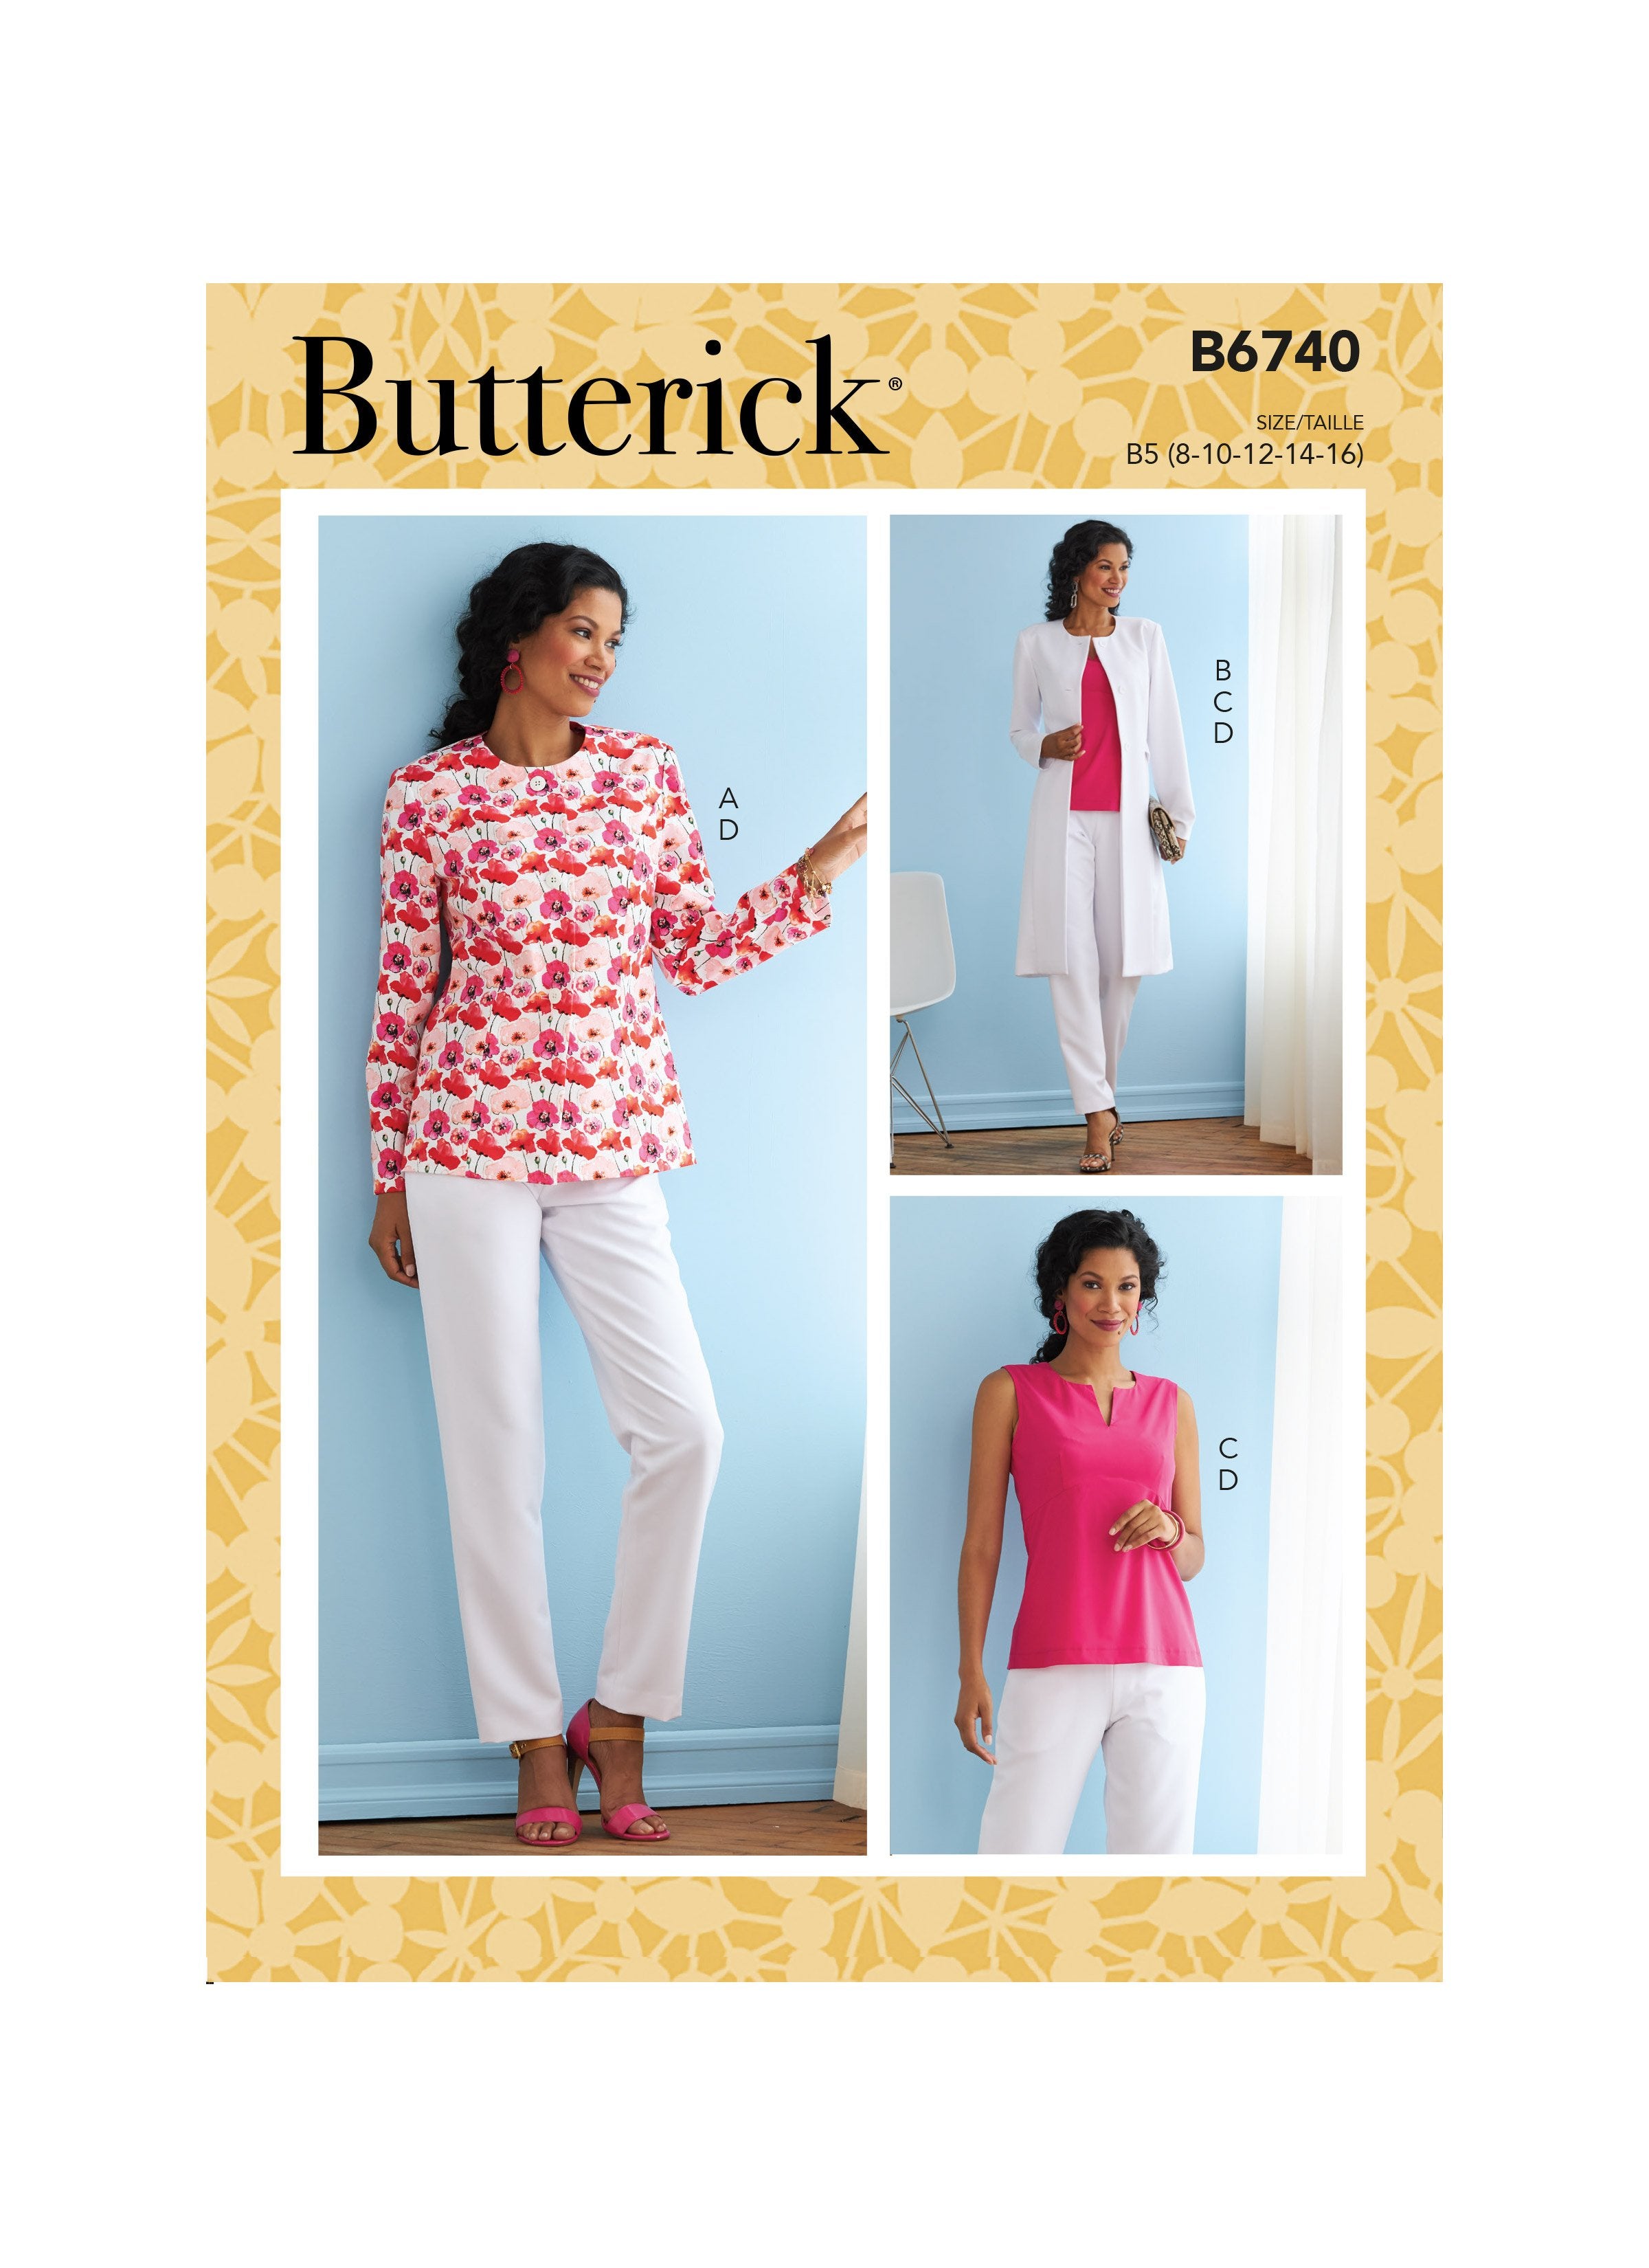 Butterick Sewing Pattern 6740 Jacket, Coat, Top and Pants from Jaycotts Sewing Supplies